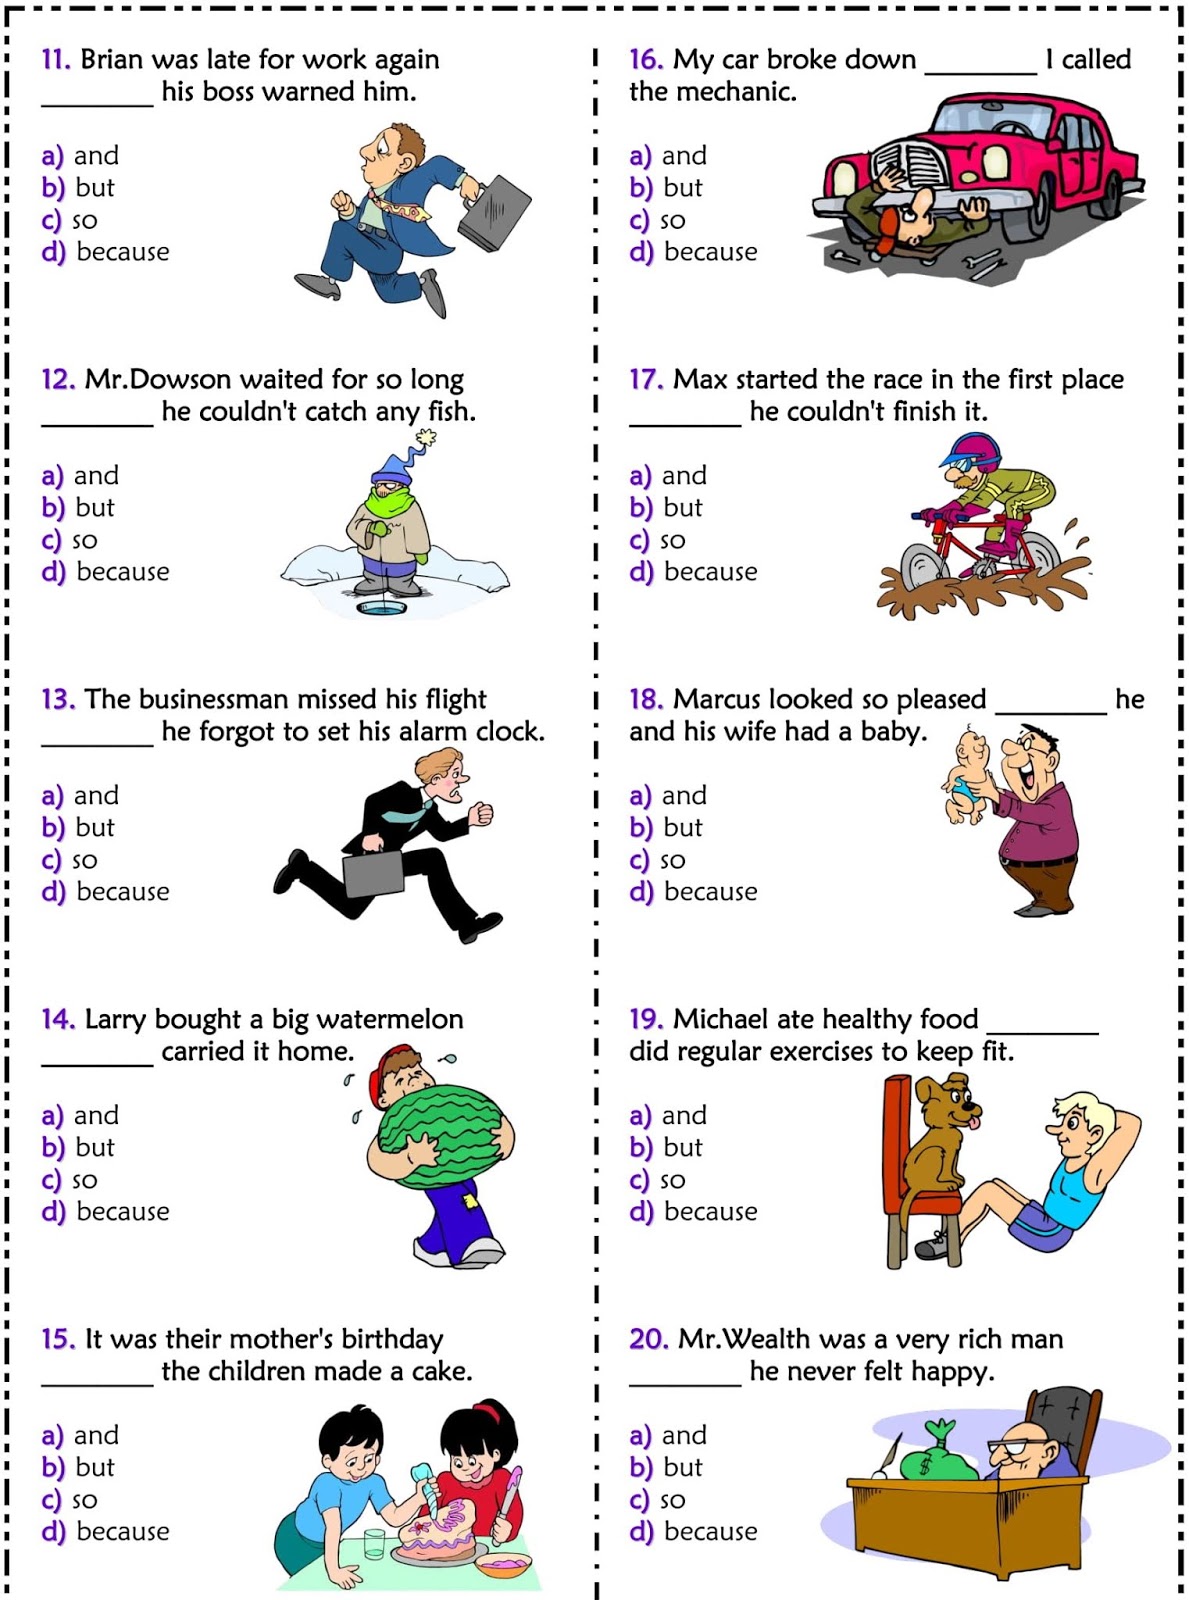 conjunctions-and-although-as-because-so-but-if-or-esl-worksheet-by-voy1